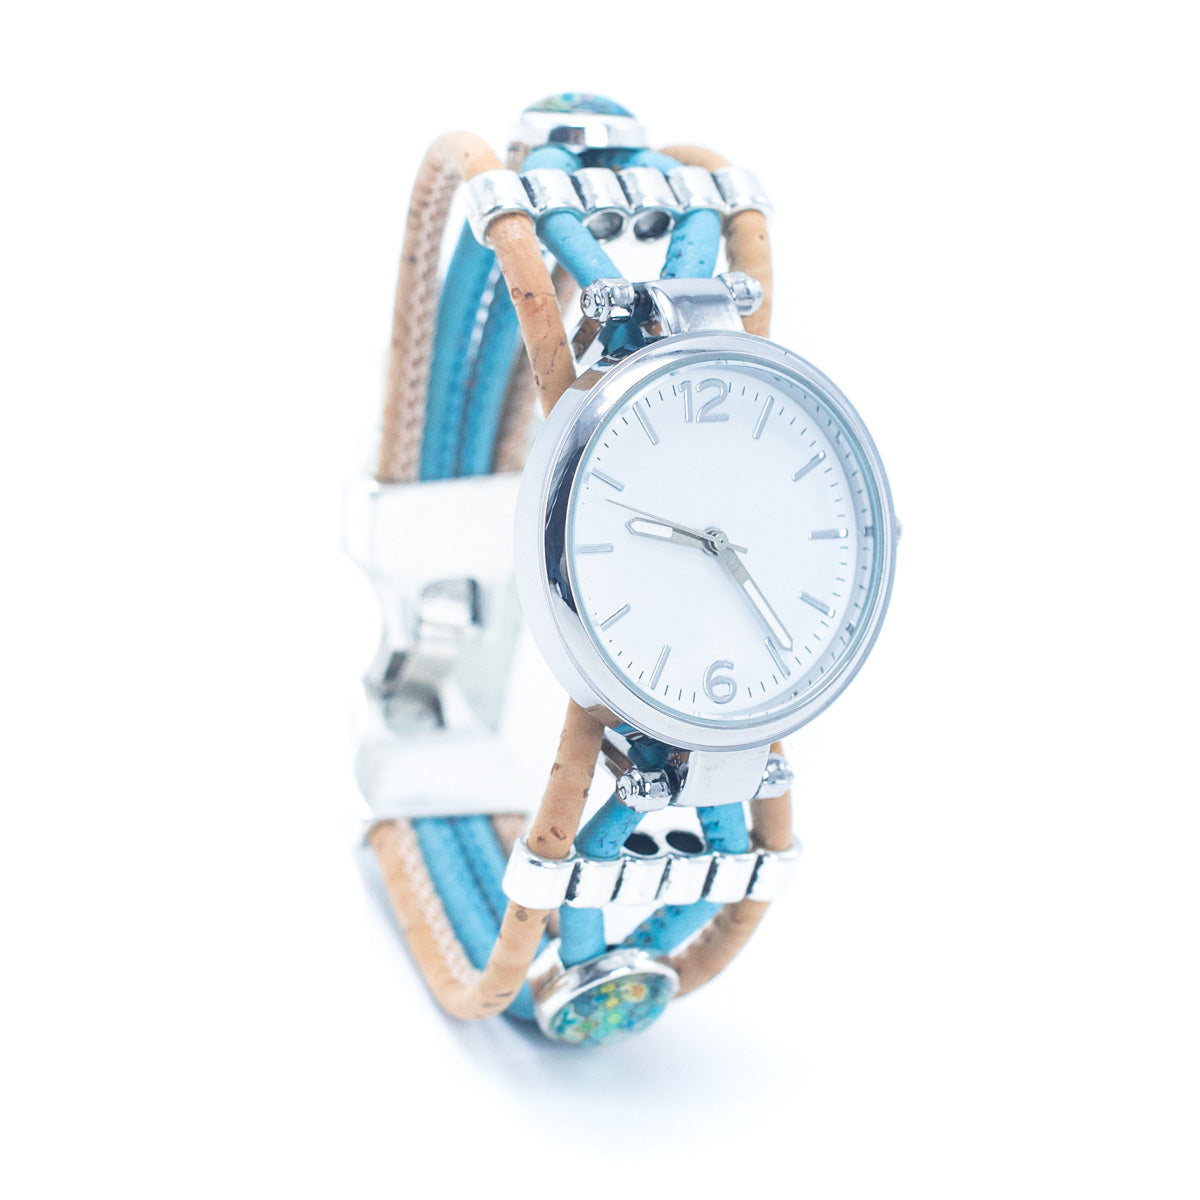 Cork Watch Collection - The Sea Blue